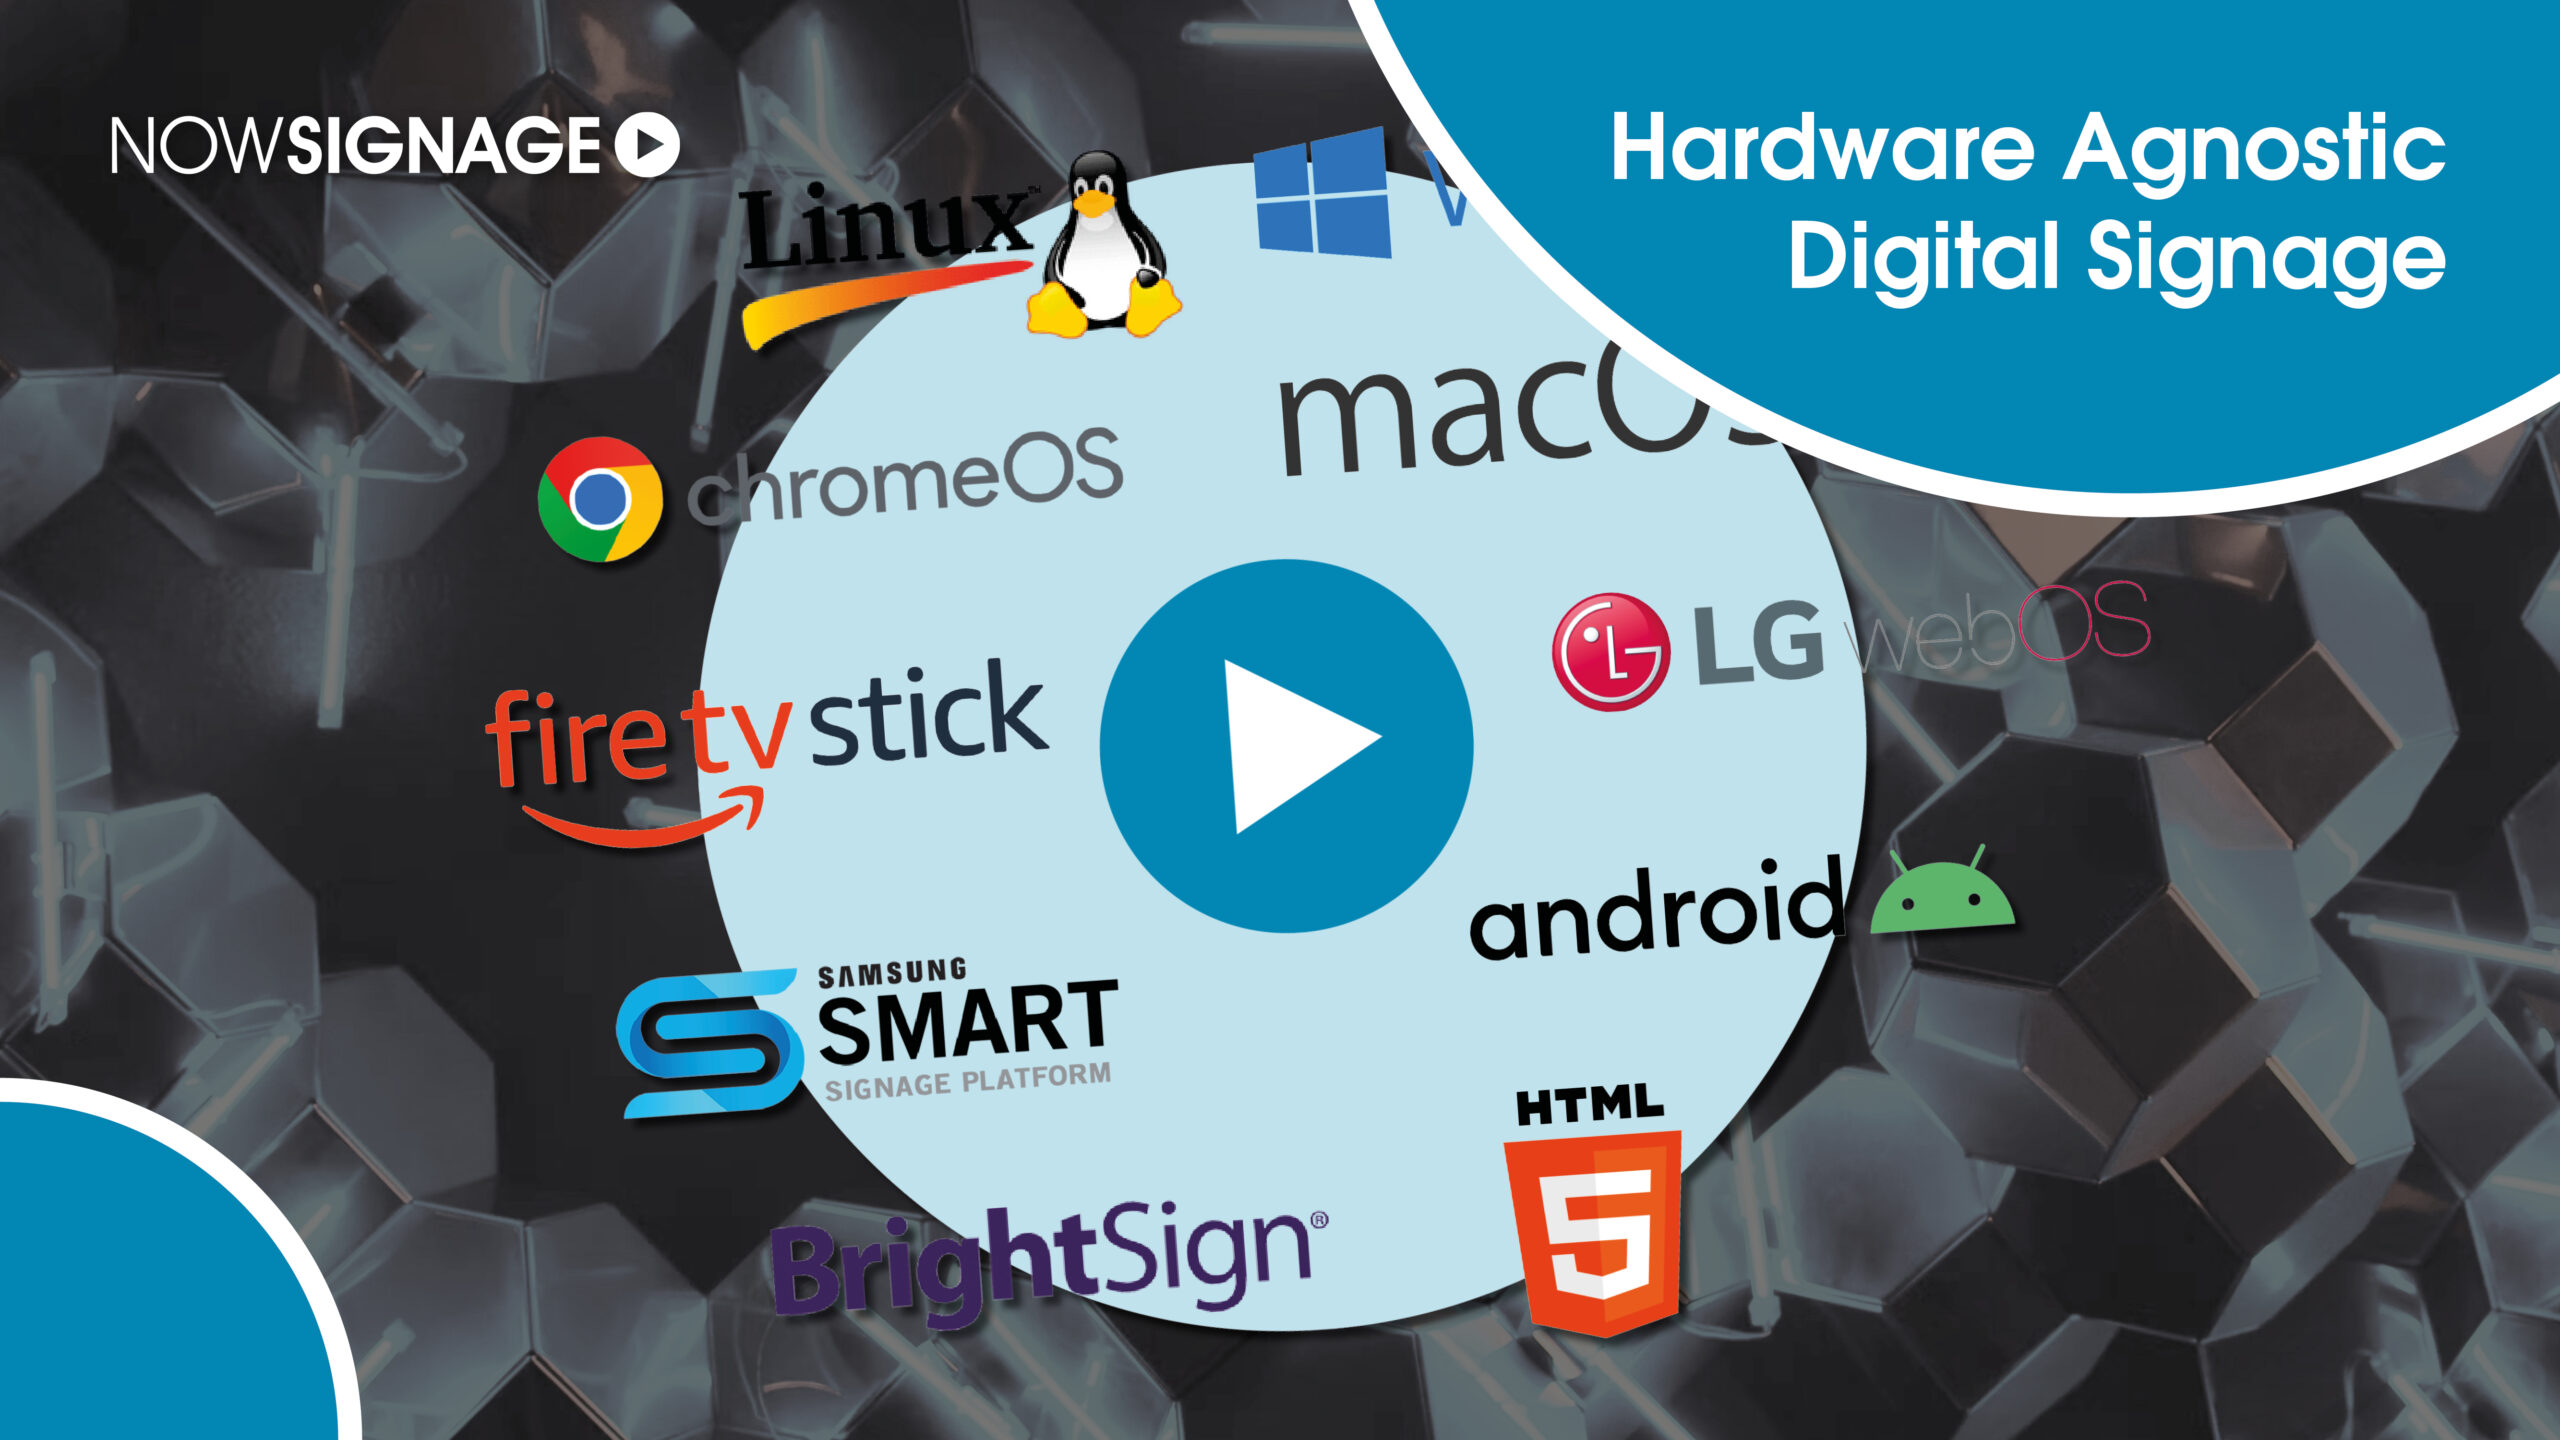 Why hardware agnostic is an important feature for Digital Signage